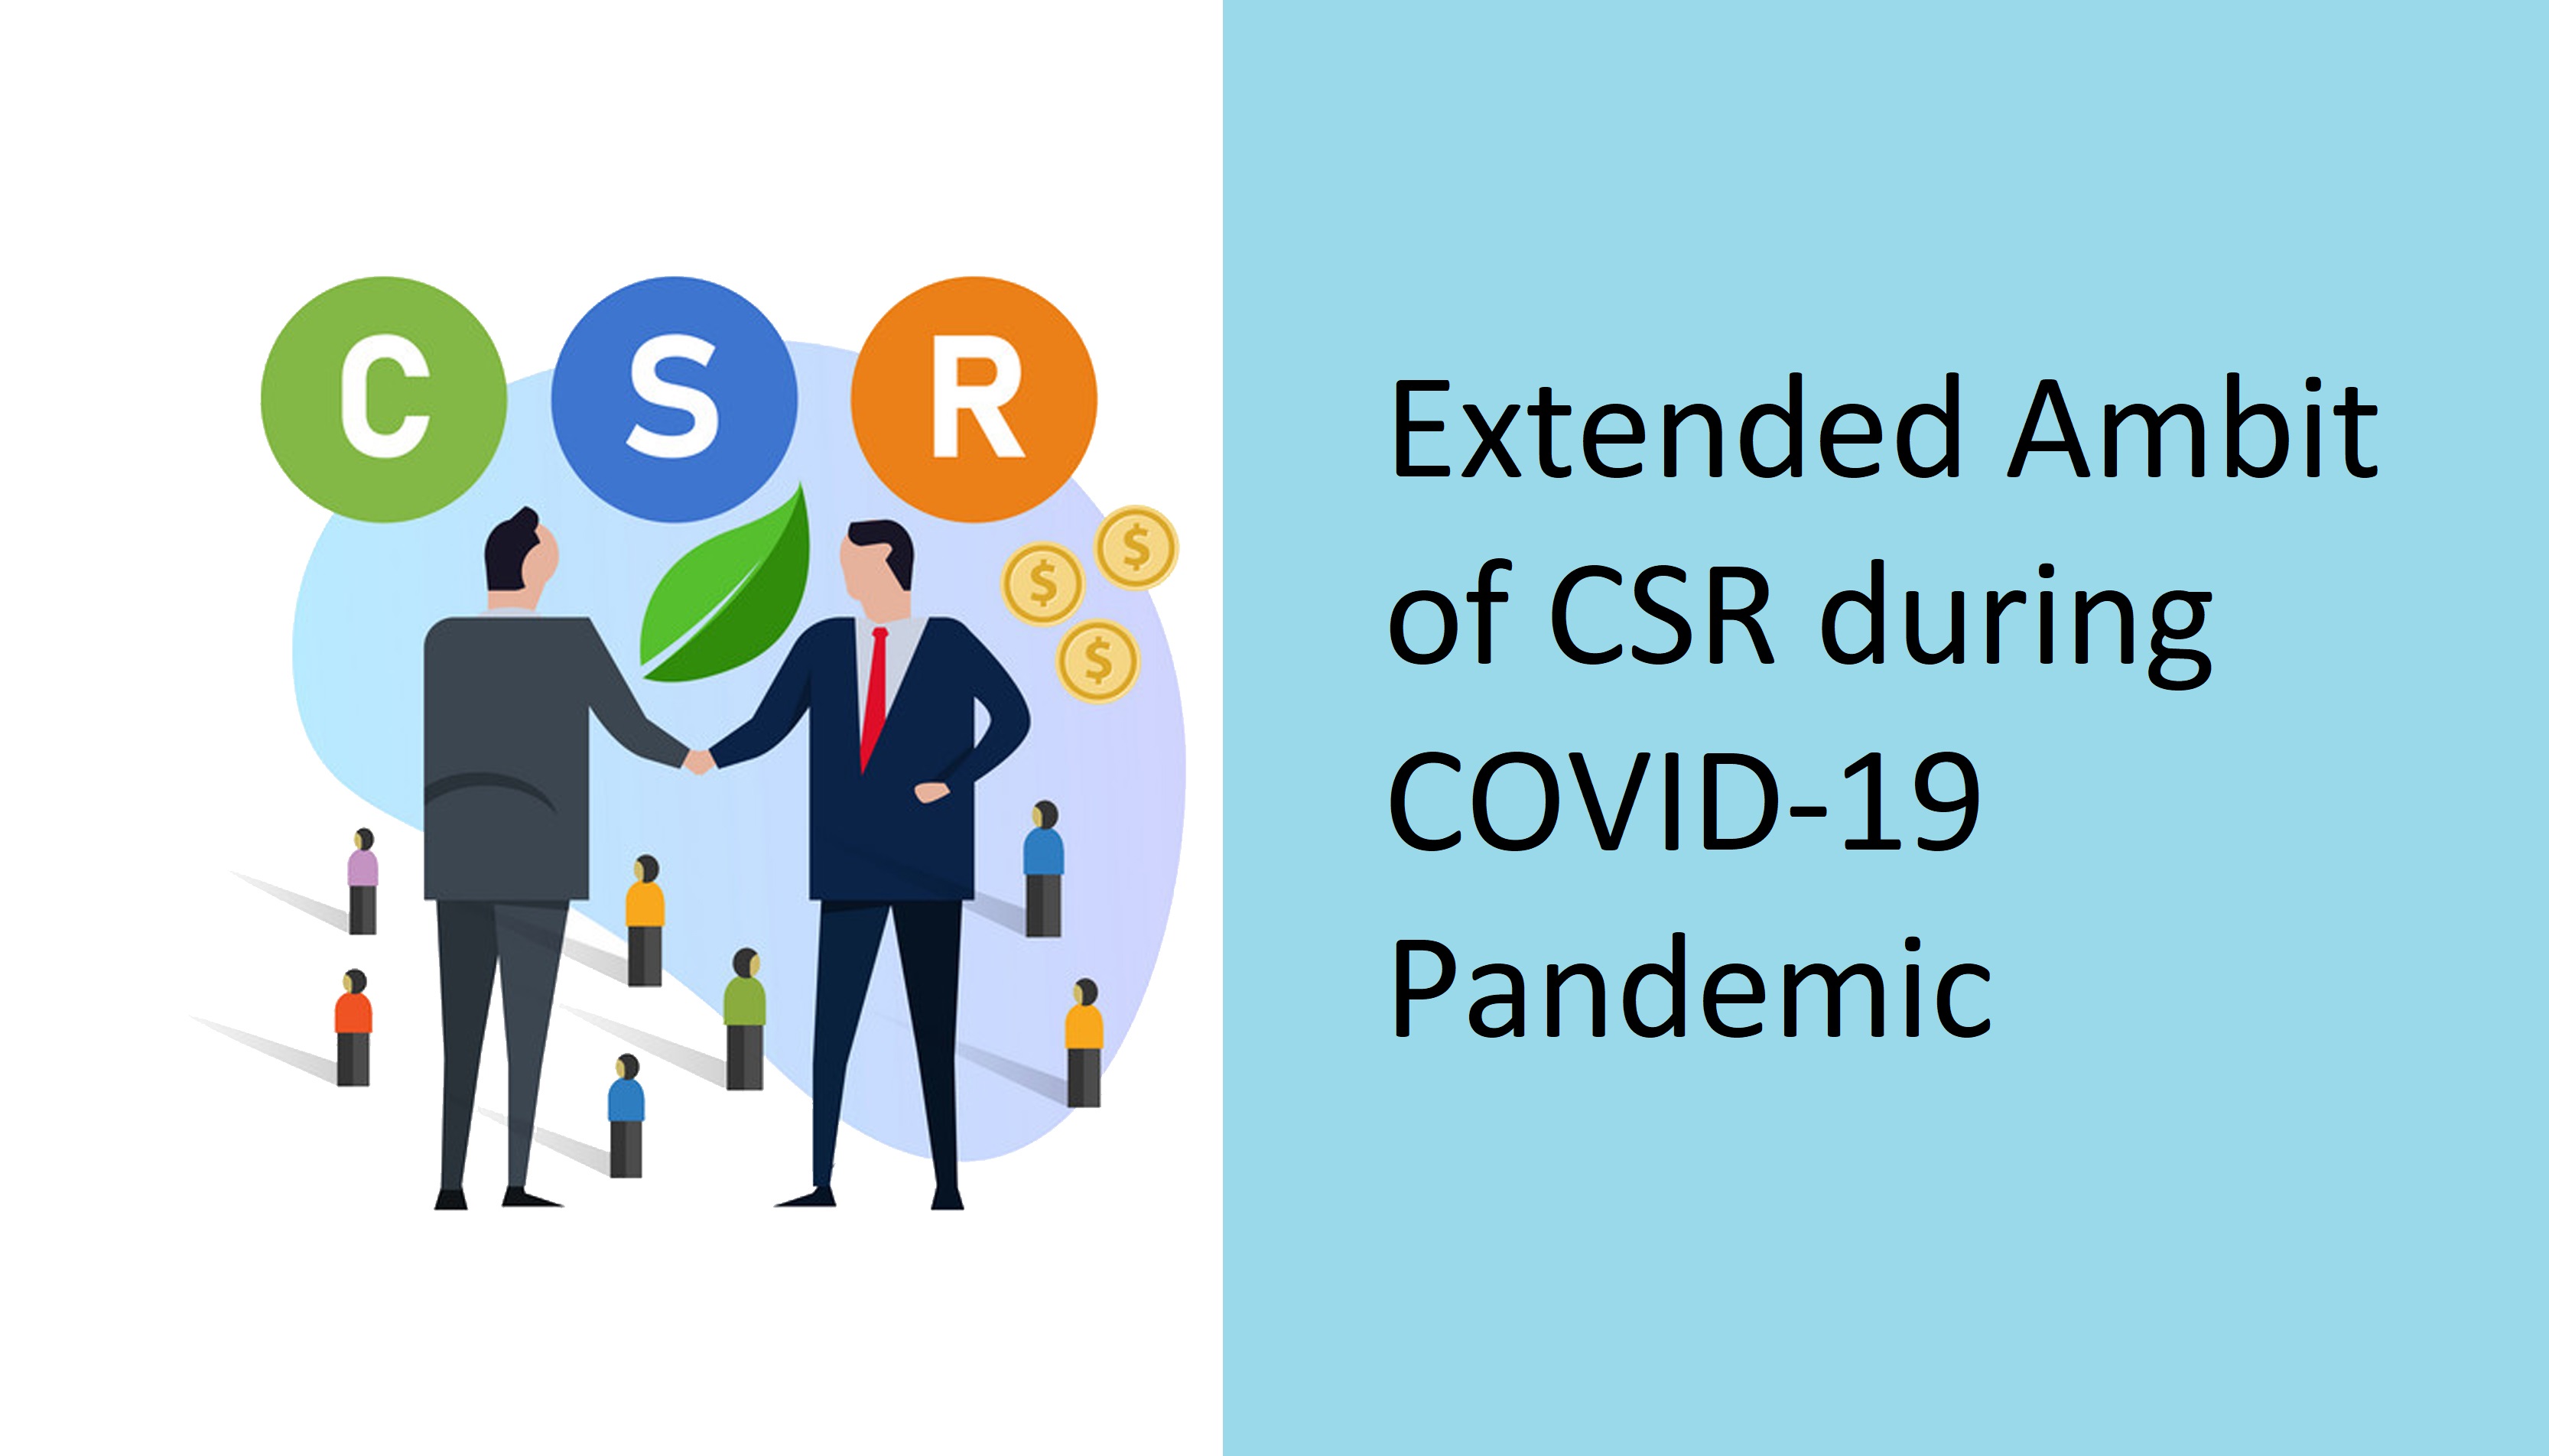 Extended ambit of CSR during COVID-19 pandemic